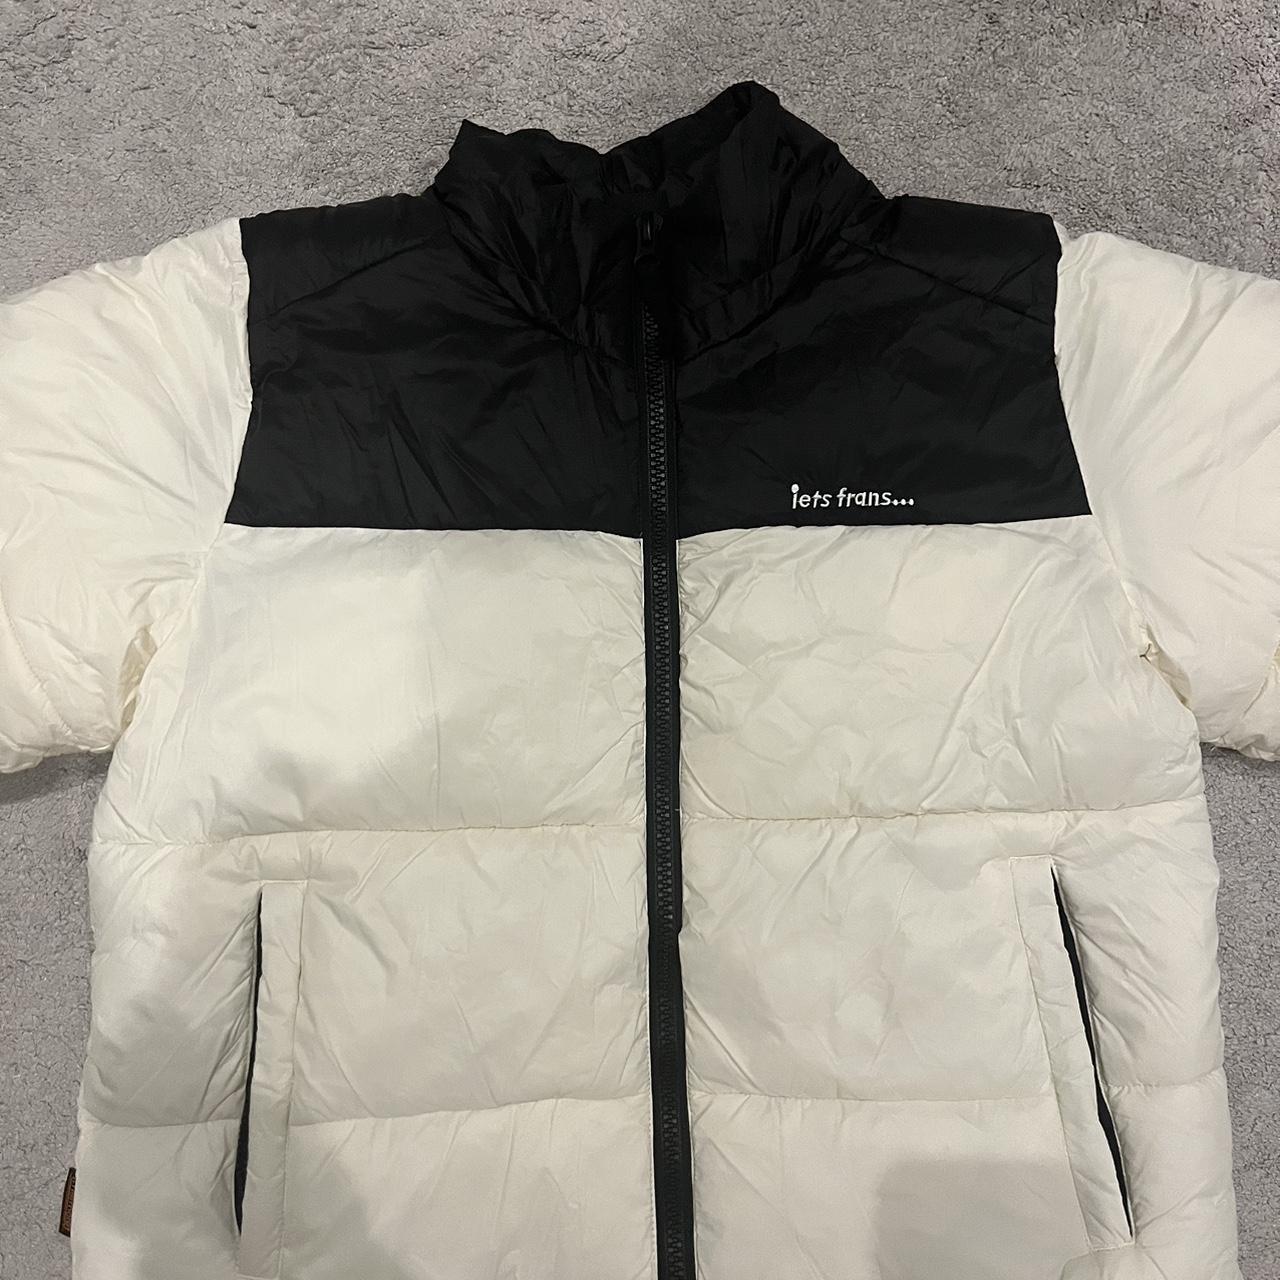 Iets Frans Black and White Puffer Jacket - Depop